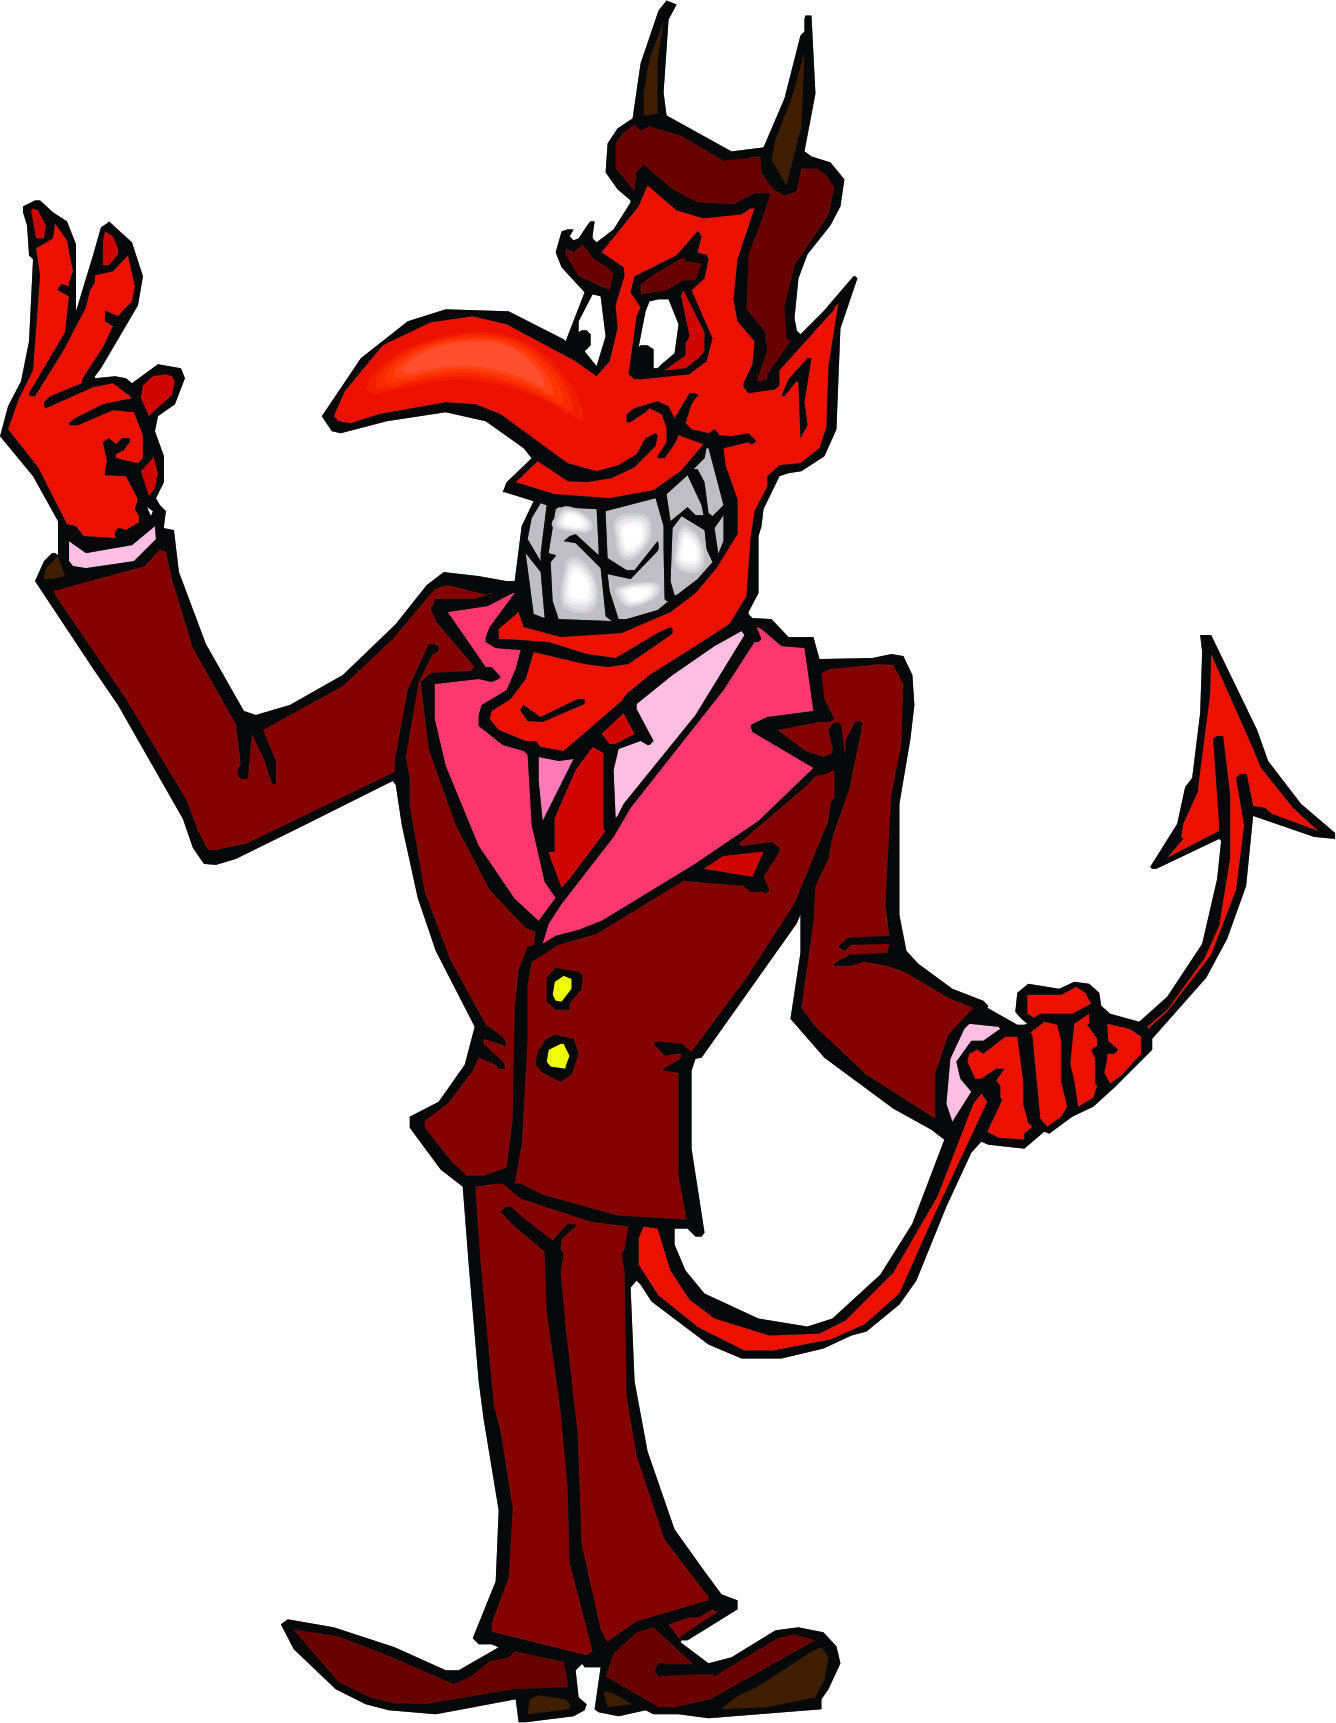 Free Cartoon Devil Pictures, Download Free Cartoon Devil Pictures png images, Free ClipArts on